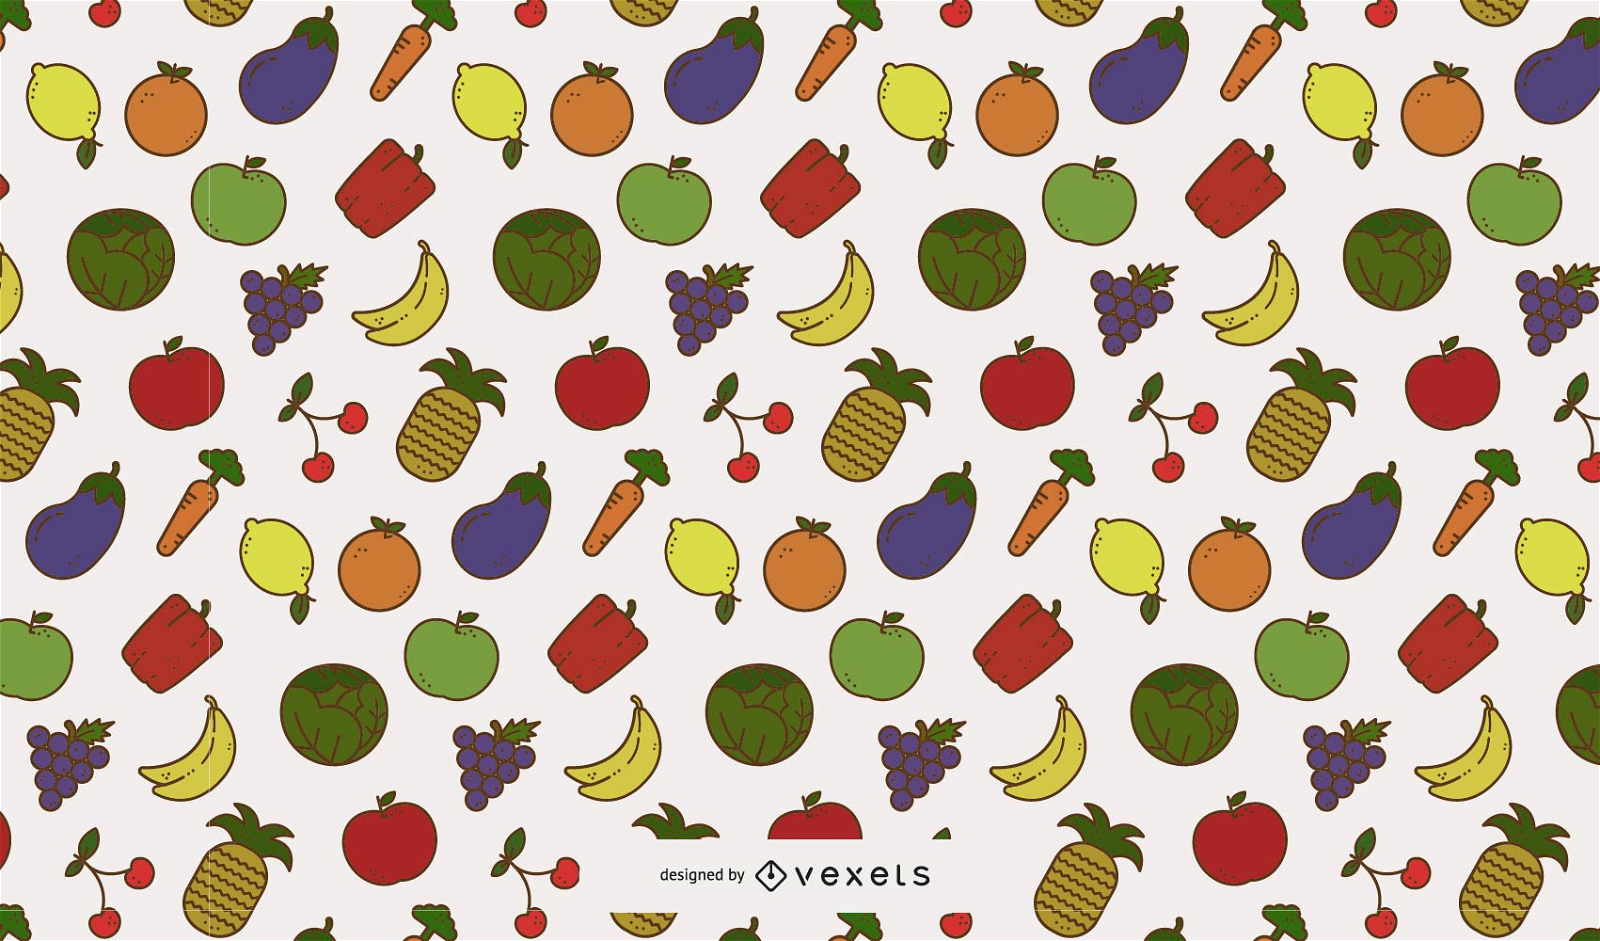 Fruits and vegetables pattern